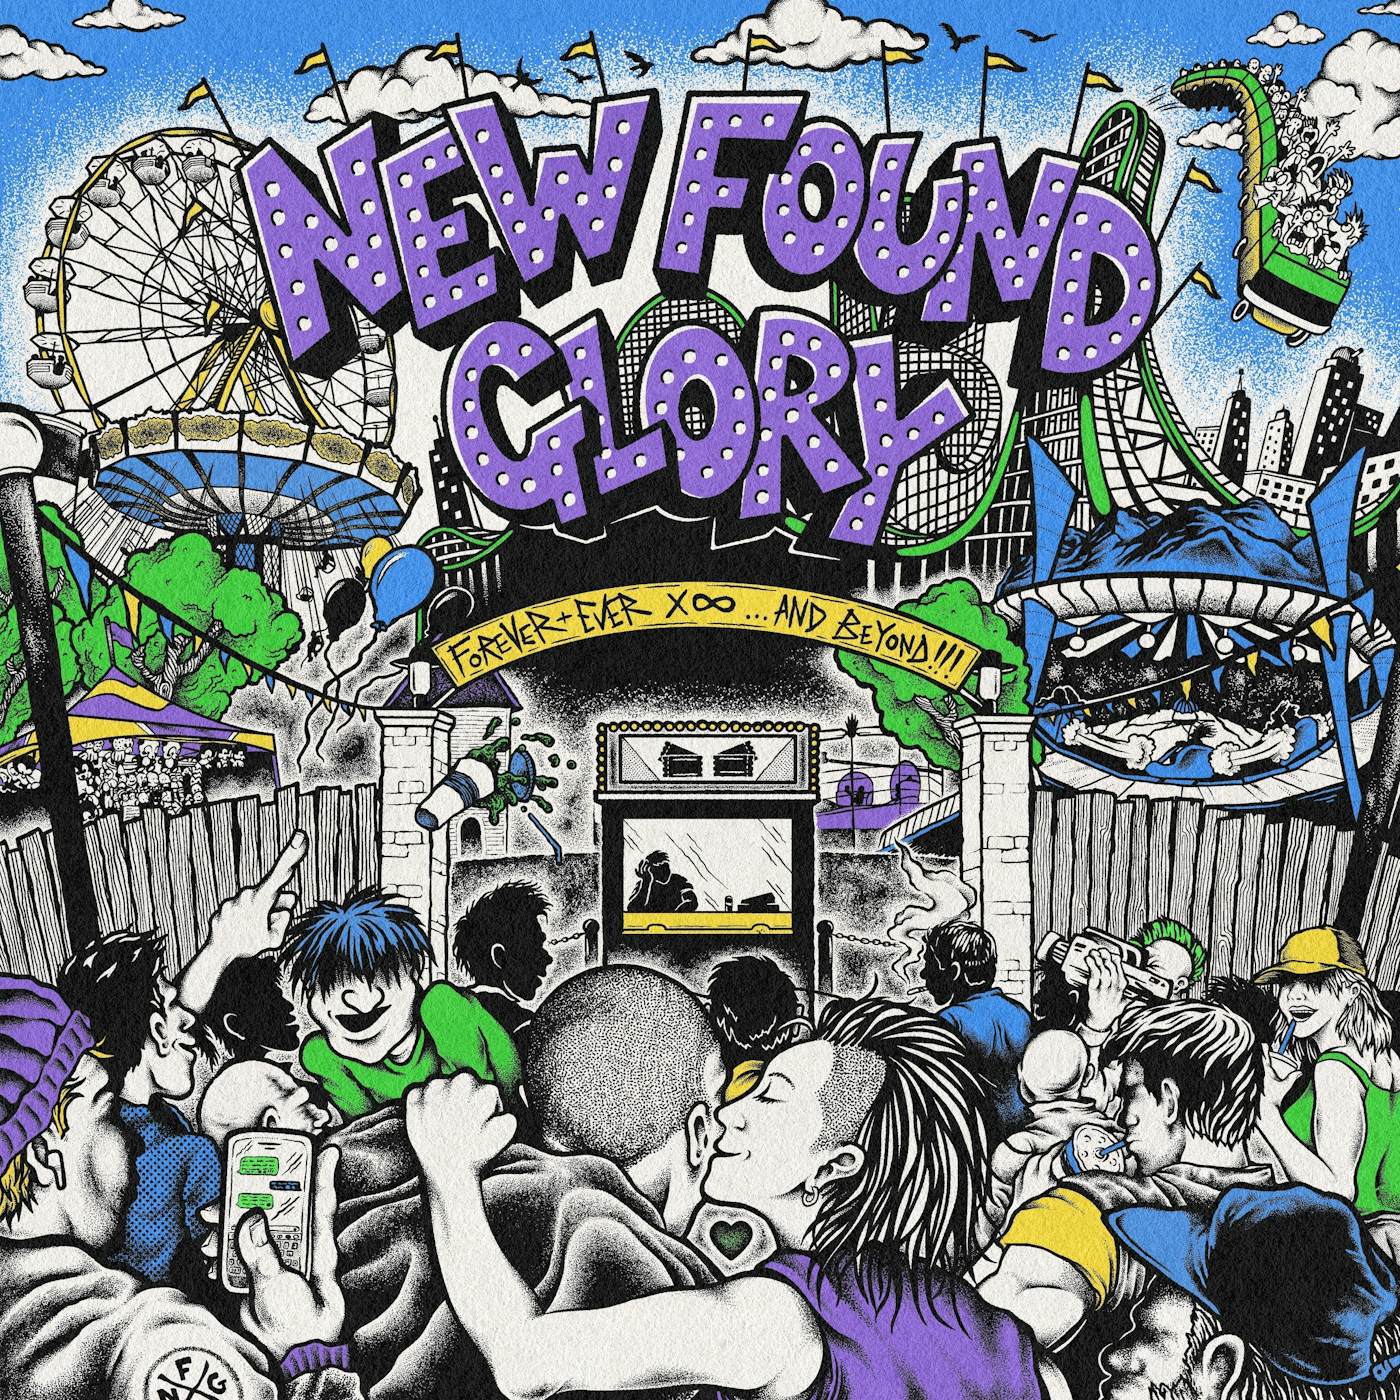 New Found Glory FOREVER + EVER X INFINITY & BEYOND CD